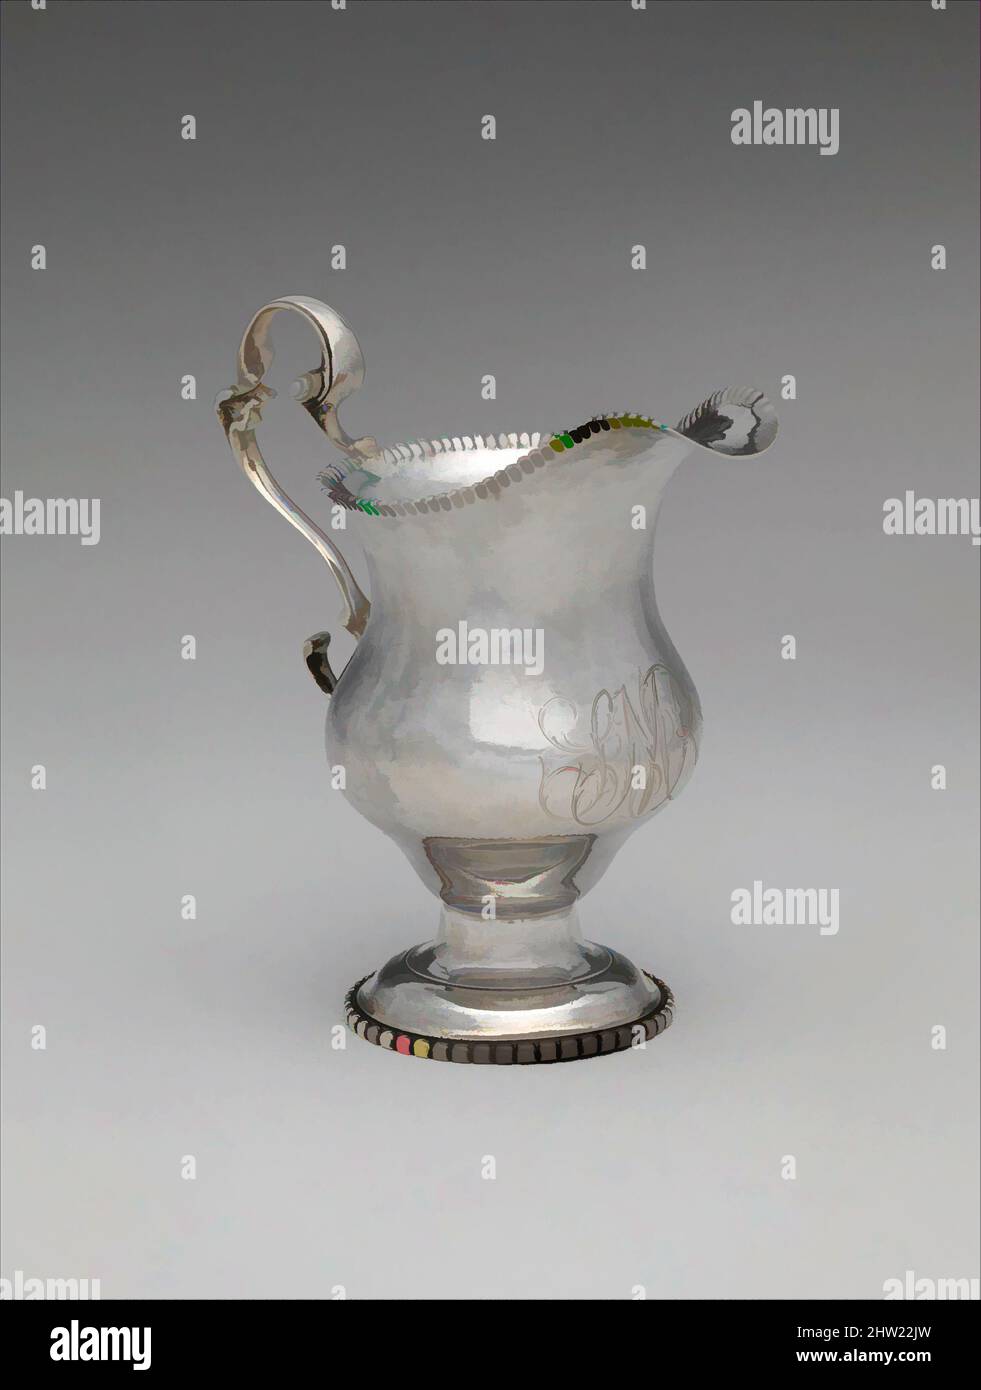 https://c8.alamy.com/comp/2HW22JW/art-inspired-by-creamer-17701795-made-in-philadelphia-pennsylvania-united-states-american-silver-overall-4-1316-x-4-34-x-2-916-in-122-x-121-x-65-cm-5-oz-1562-g-silver-john-letelier-sr-ca-17401798-classic-works-modernized-by-artotop-with-a-splash-of-modernity-shapes-color-and-value-eye-catching-visual-impact-on-art-emotions-through-freedom-of-artworks-in-a-contemporary-way-a-timeless-message-pursuing-a-wildly-creative-new-direction-artists-turning-to-the-digital-medium-and-creating-the-artotop-nft-2HW22JW.jpg